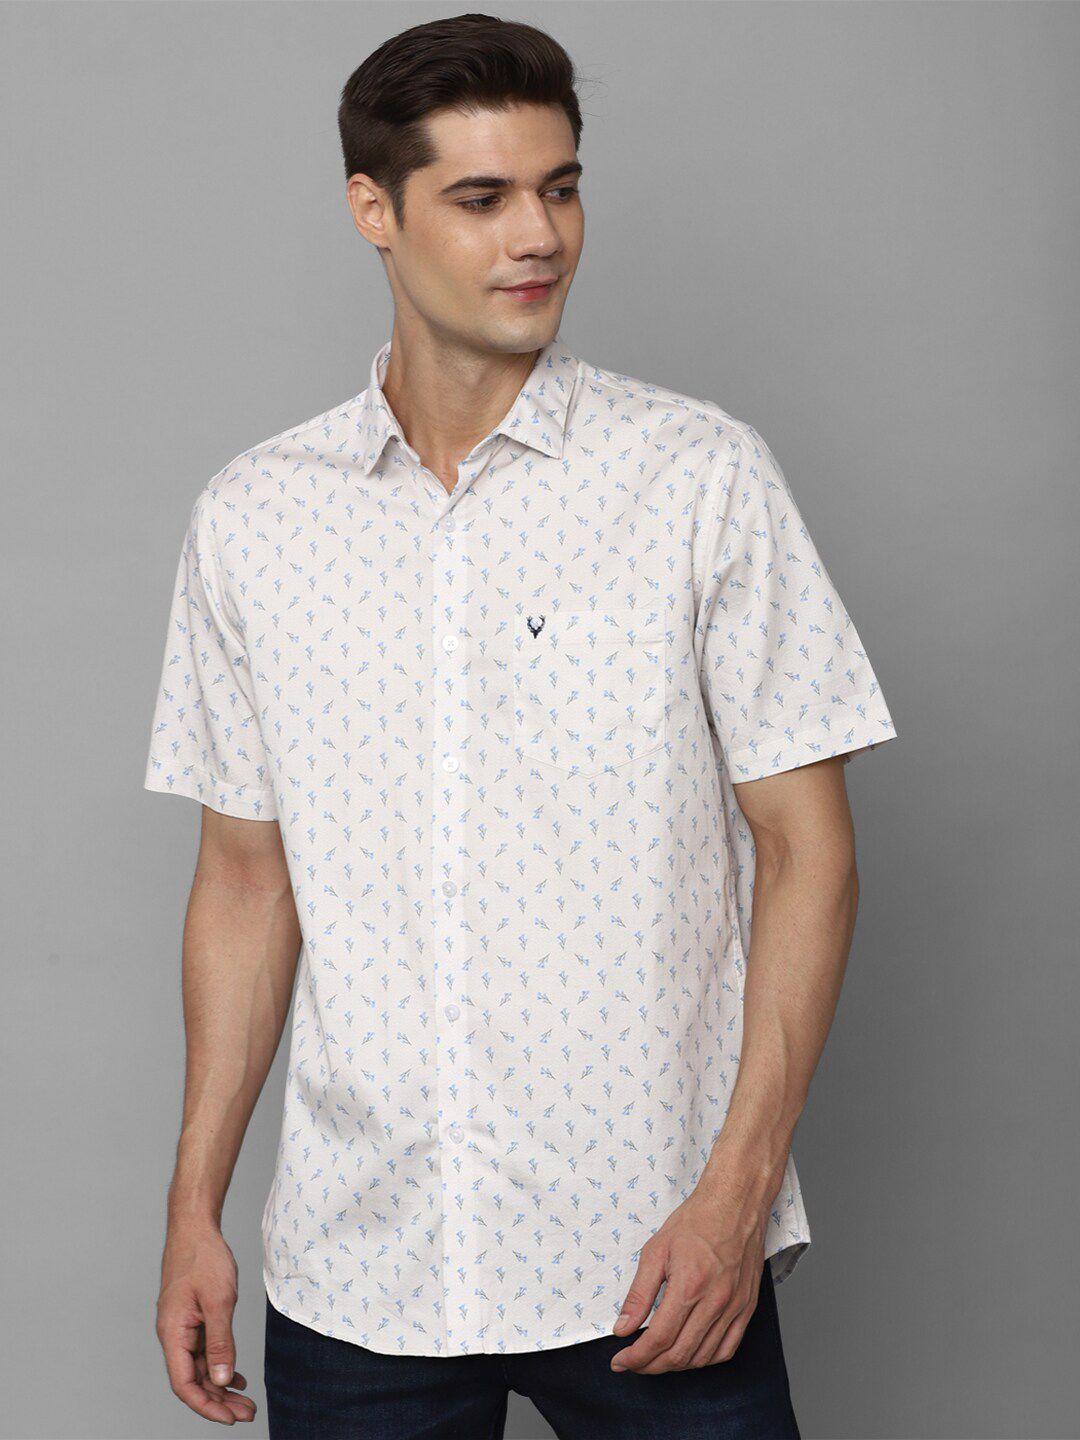 allen-solly-slim-fit-floral-printed-casual-pure-cotton-shirt